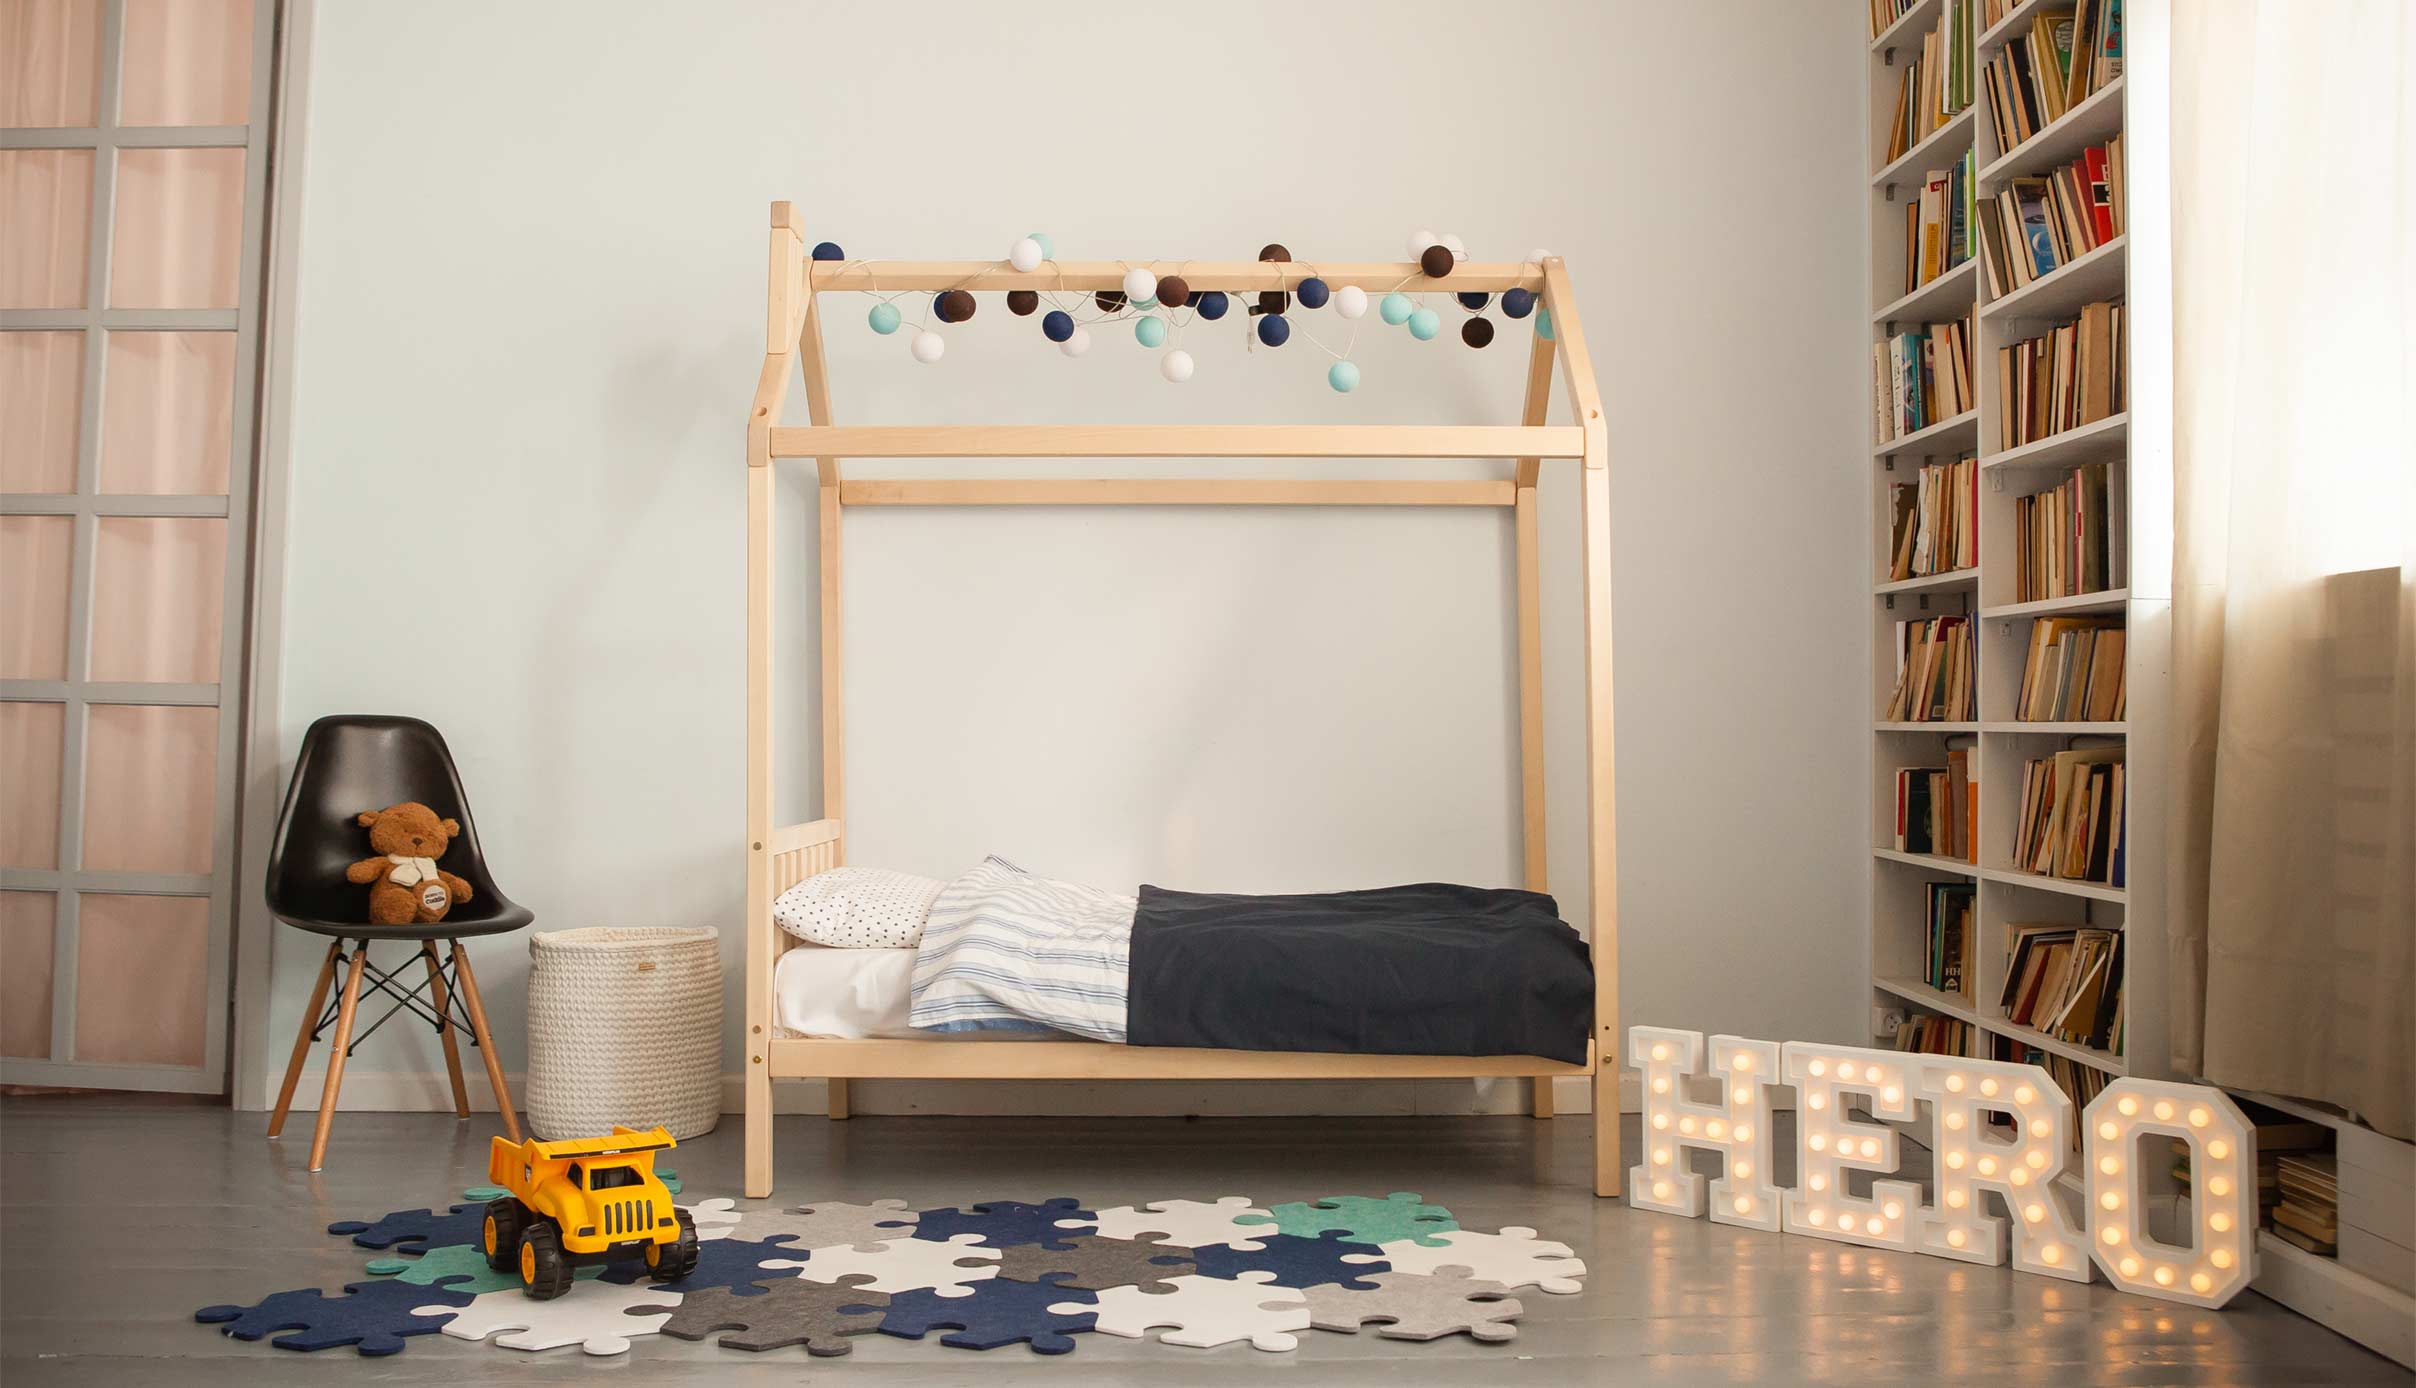 A child's bedroom with a wooden bed and bookshelves.